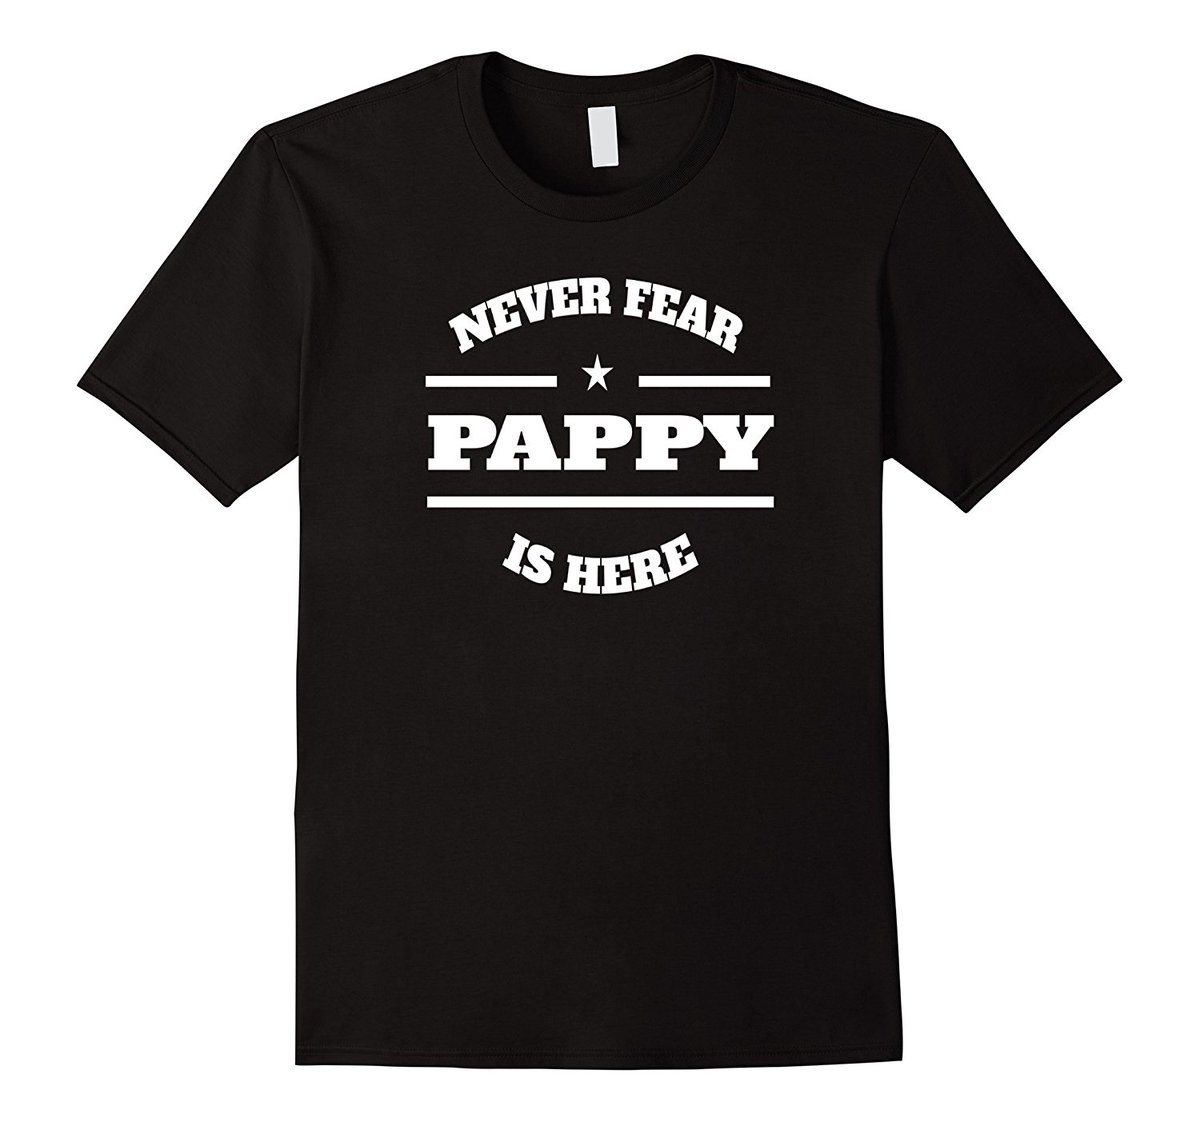 #Pappy Gift T-Shirt - #GrandparentsDay - Never Fear amzn.to/2HNjFhC
#